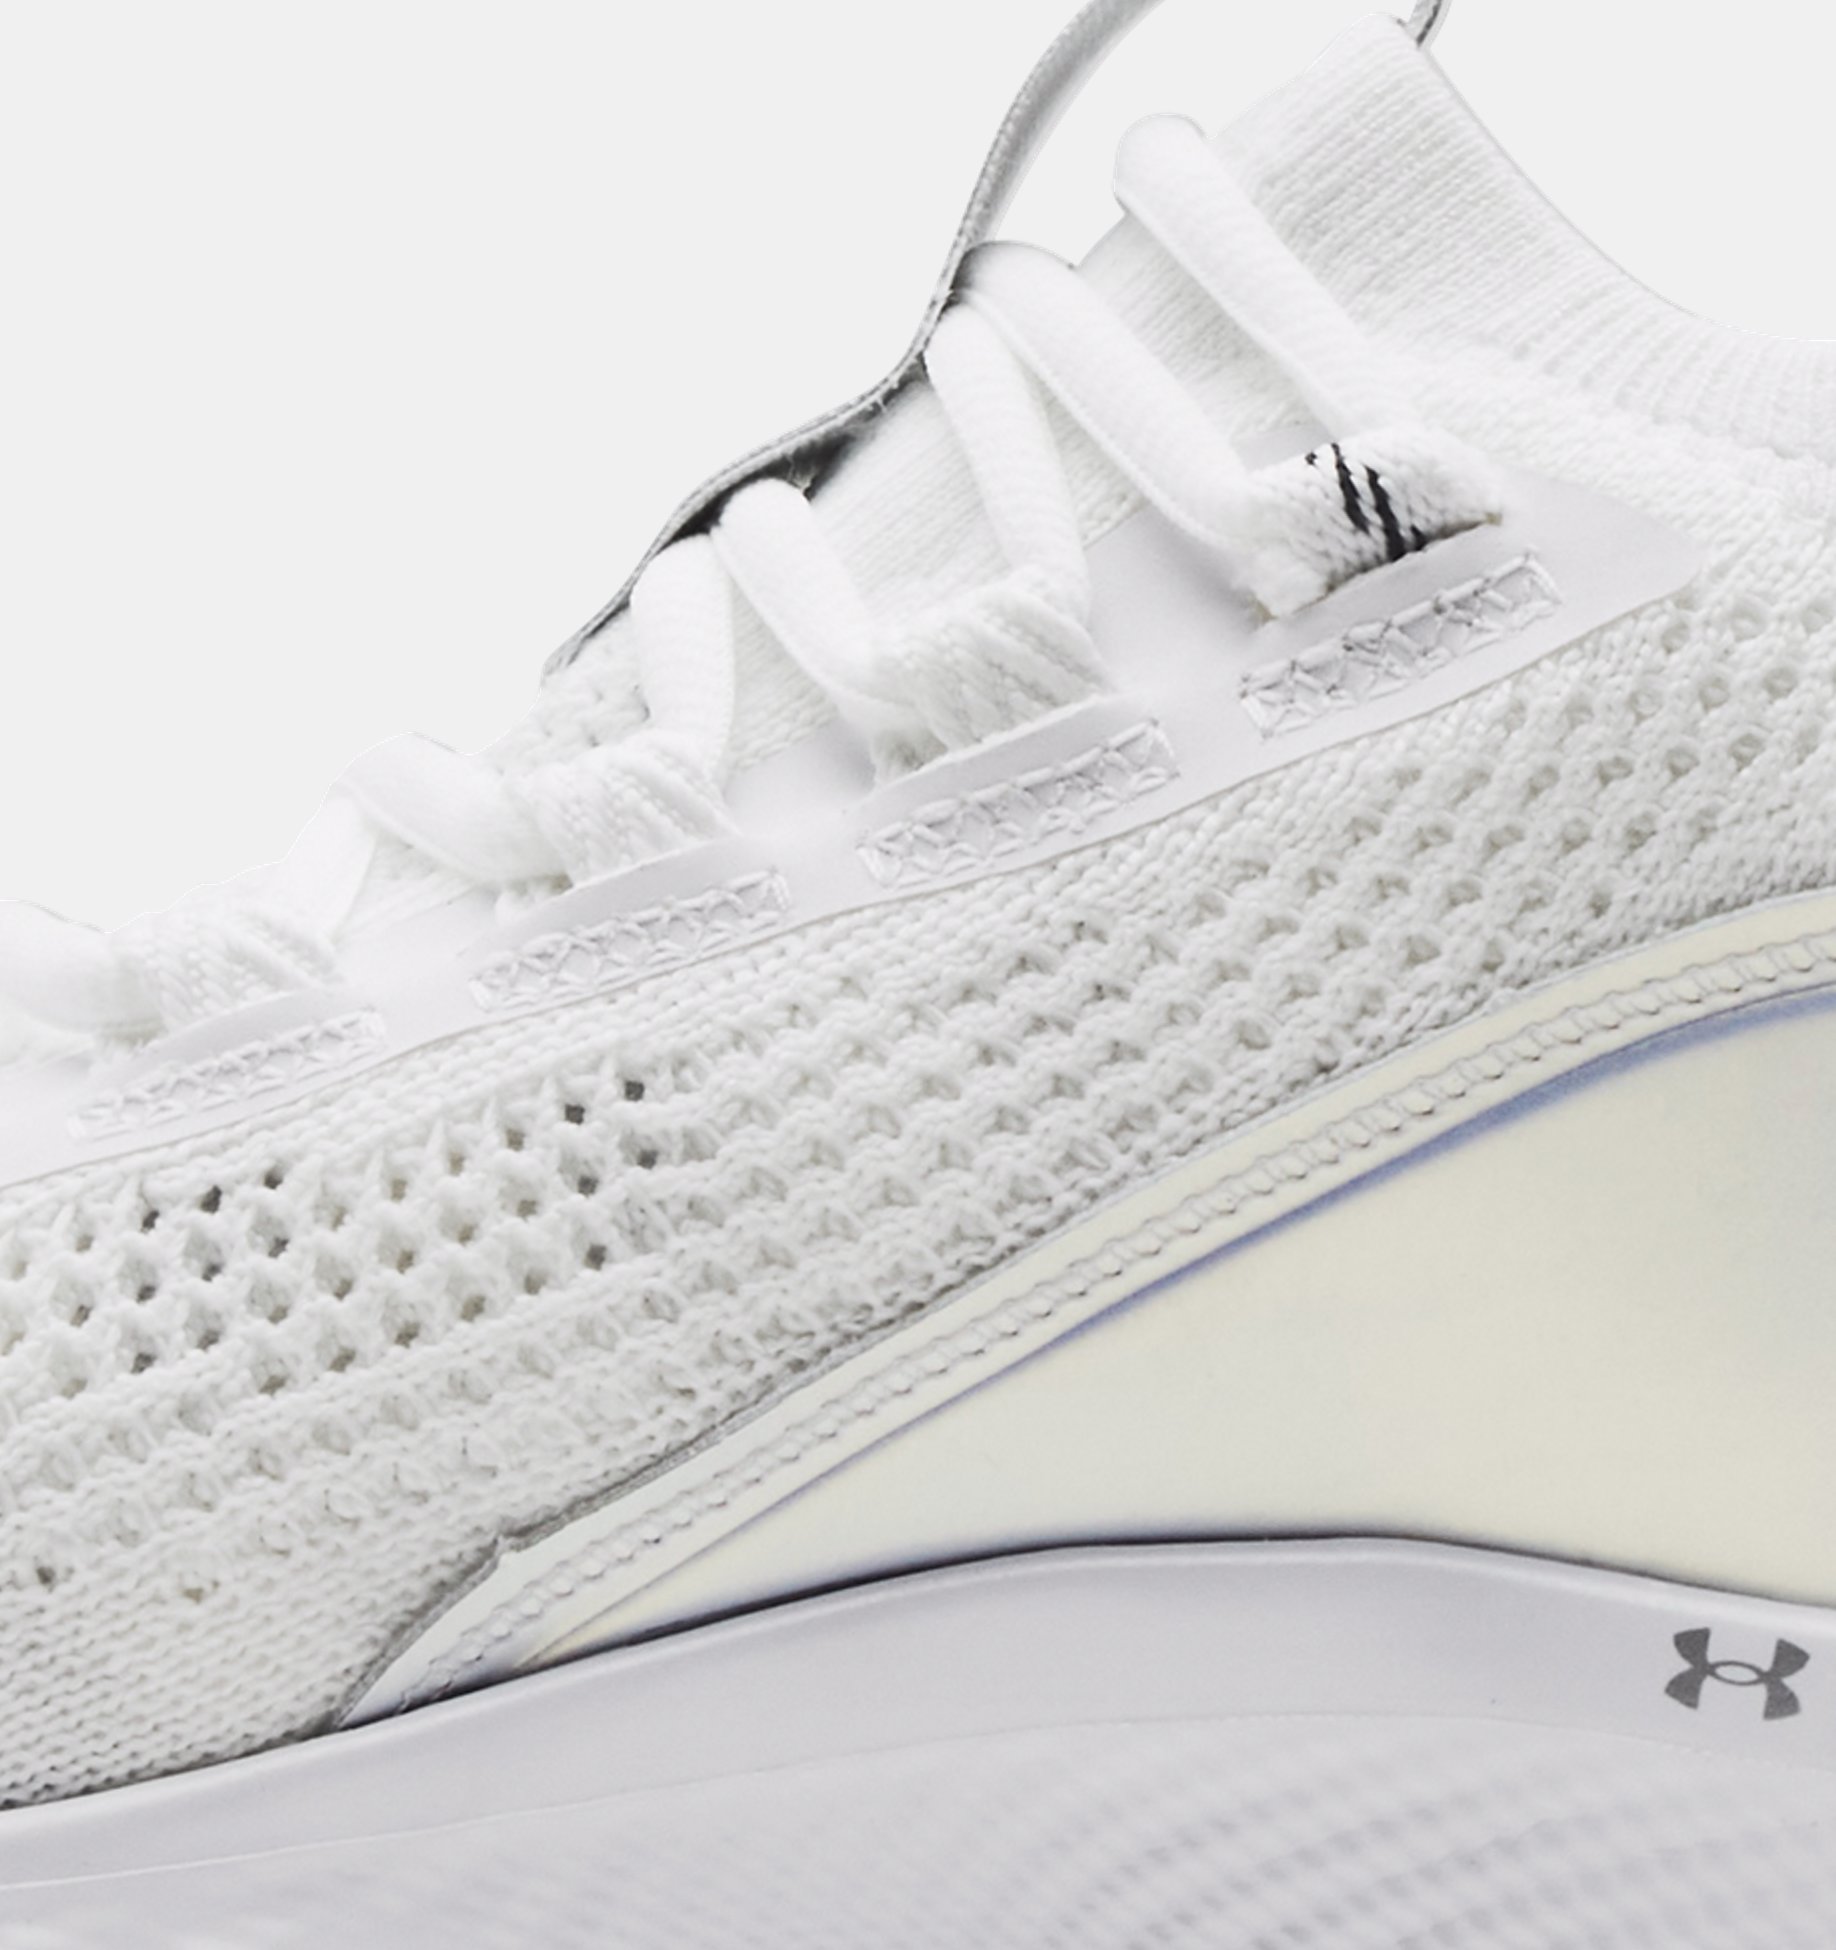 Curry Flow 8 Basketball Shoes | Under Armour